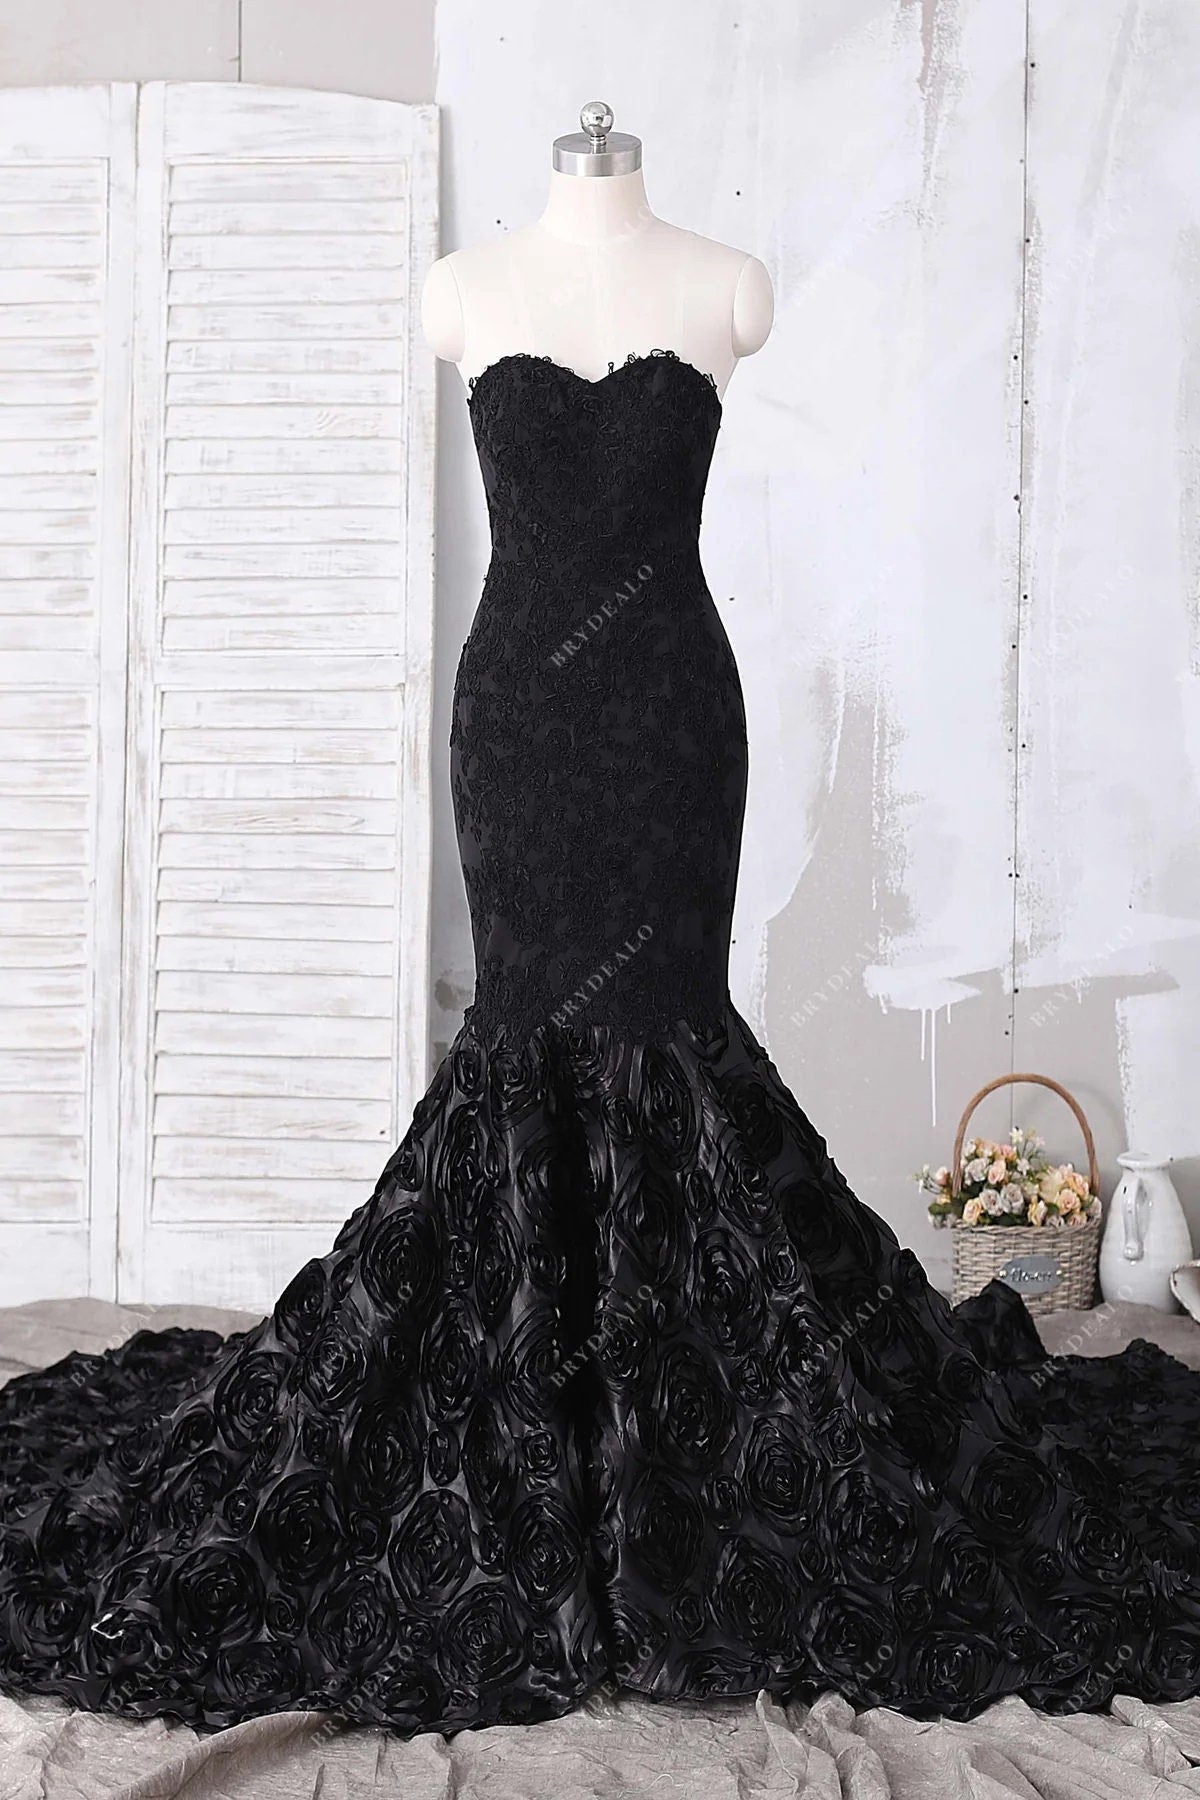 Black Sleeveless Strapless Wedding Dress 3D Rosette Train Bridal Gown Unique Design Gothic Queen Fitted Mermaid Sweetheart Neckline Backless